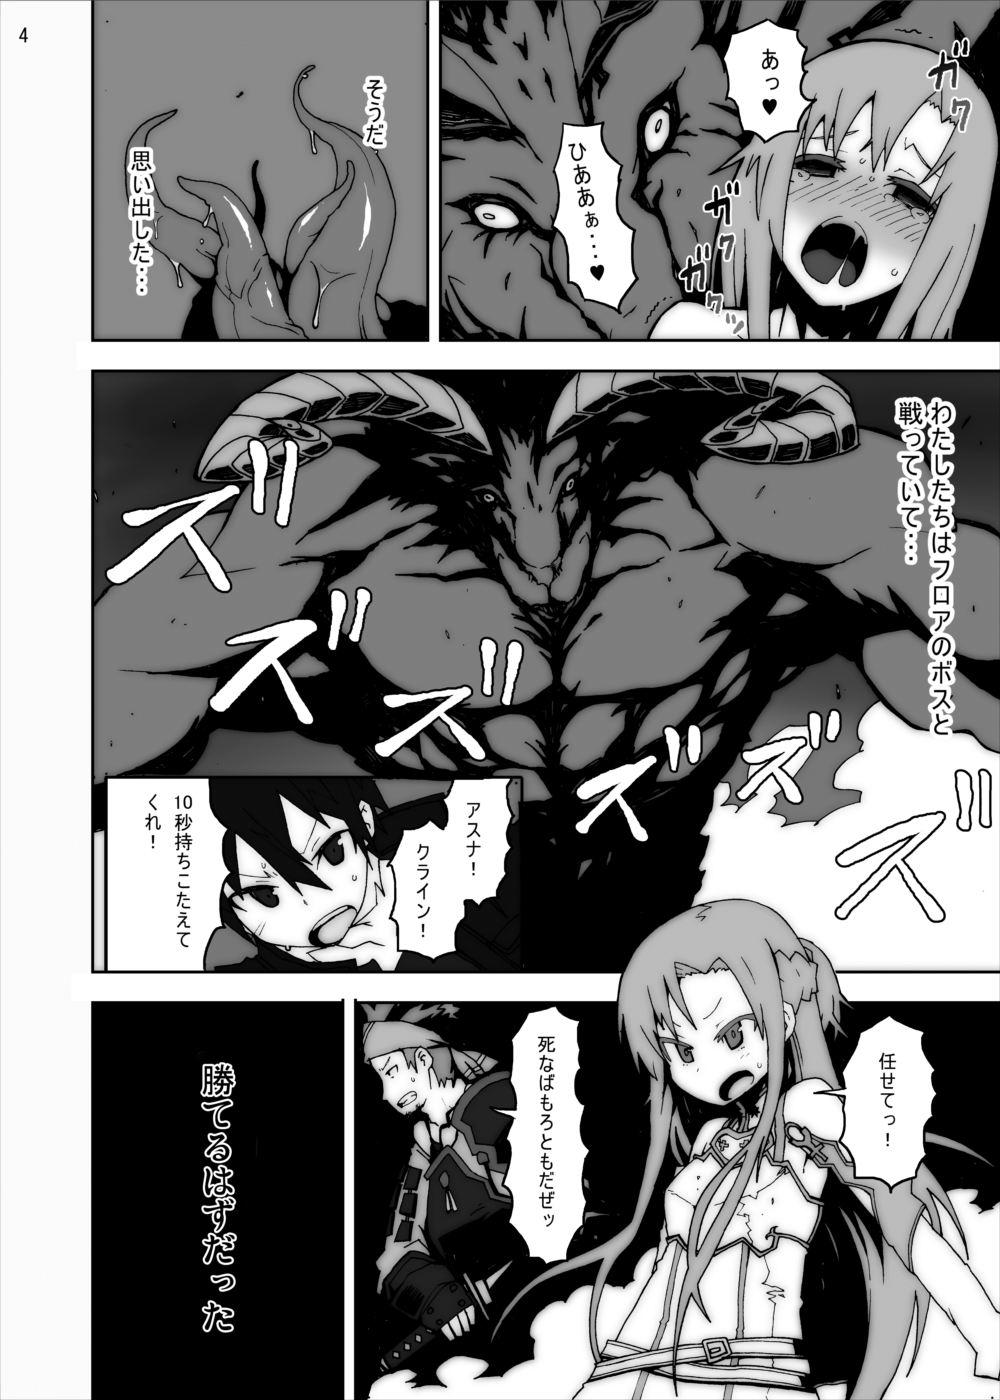 Ethnic Asuna in Tentacle Party Rape Online - Sword art online Family Roleplay - Page 3